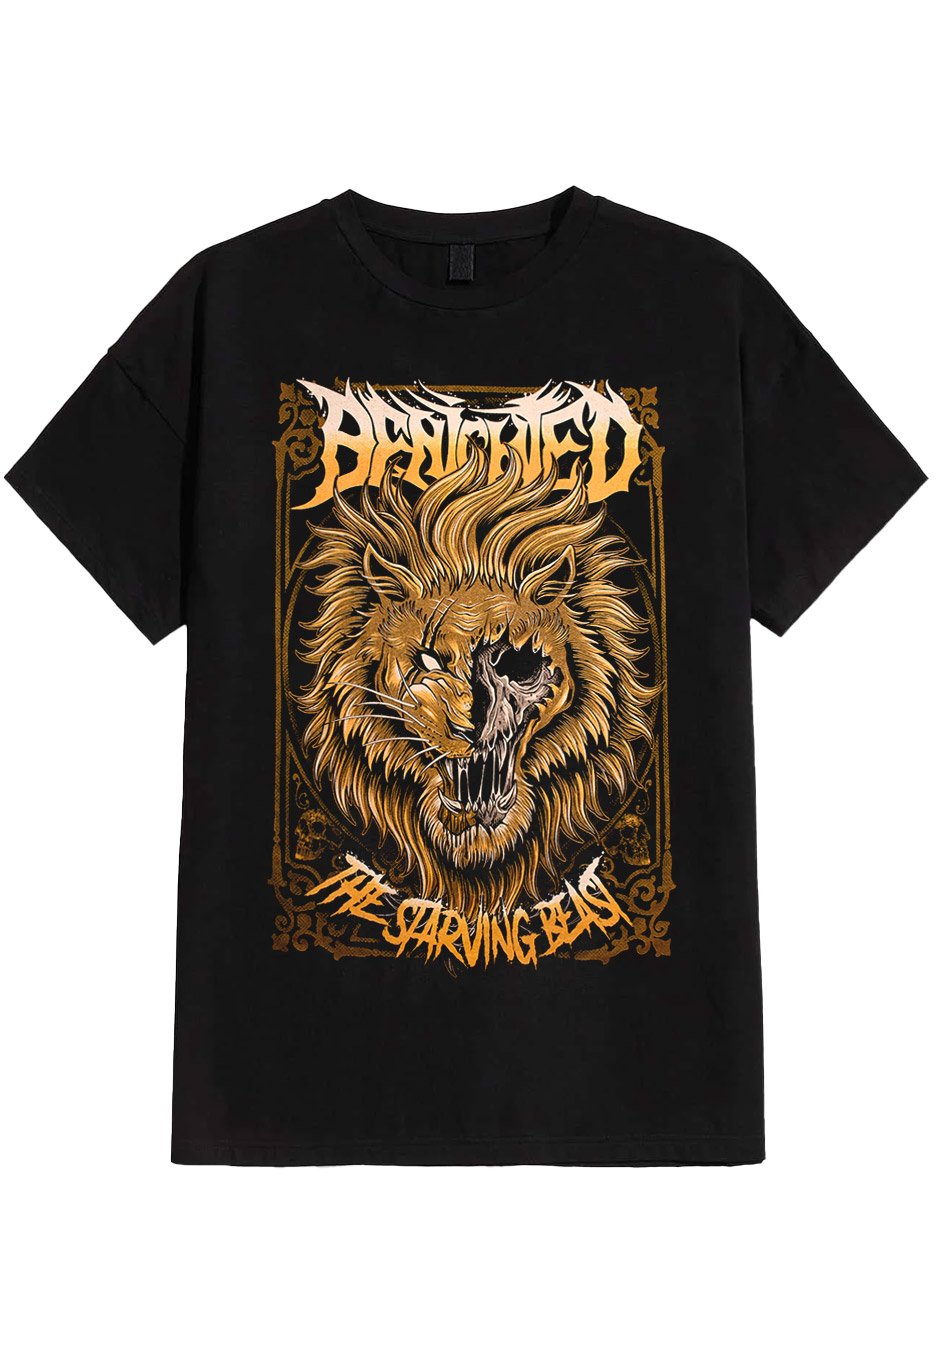 Benighted - The Starving Beast - T-Shirt